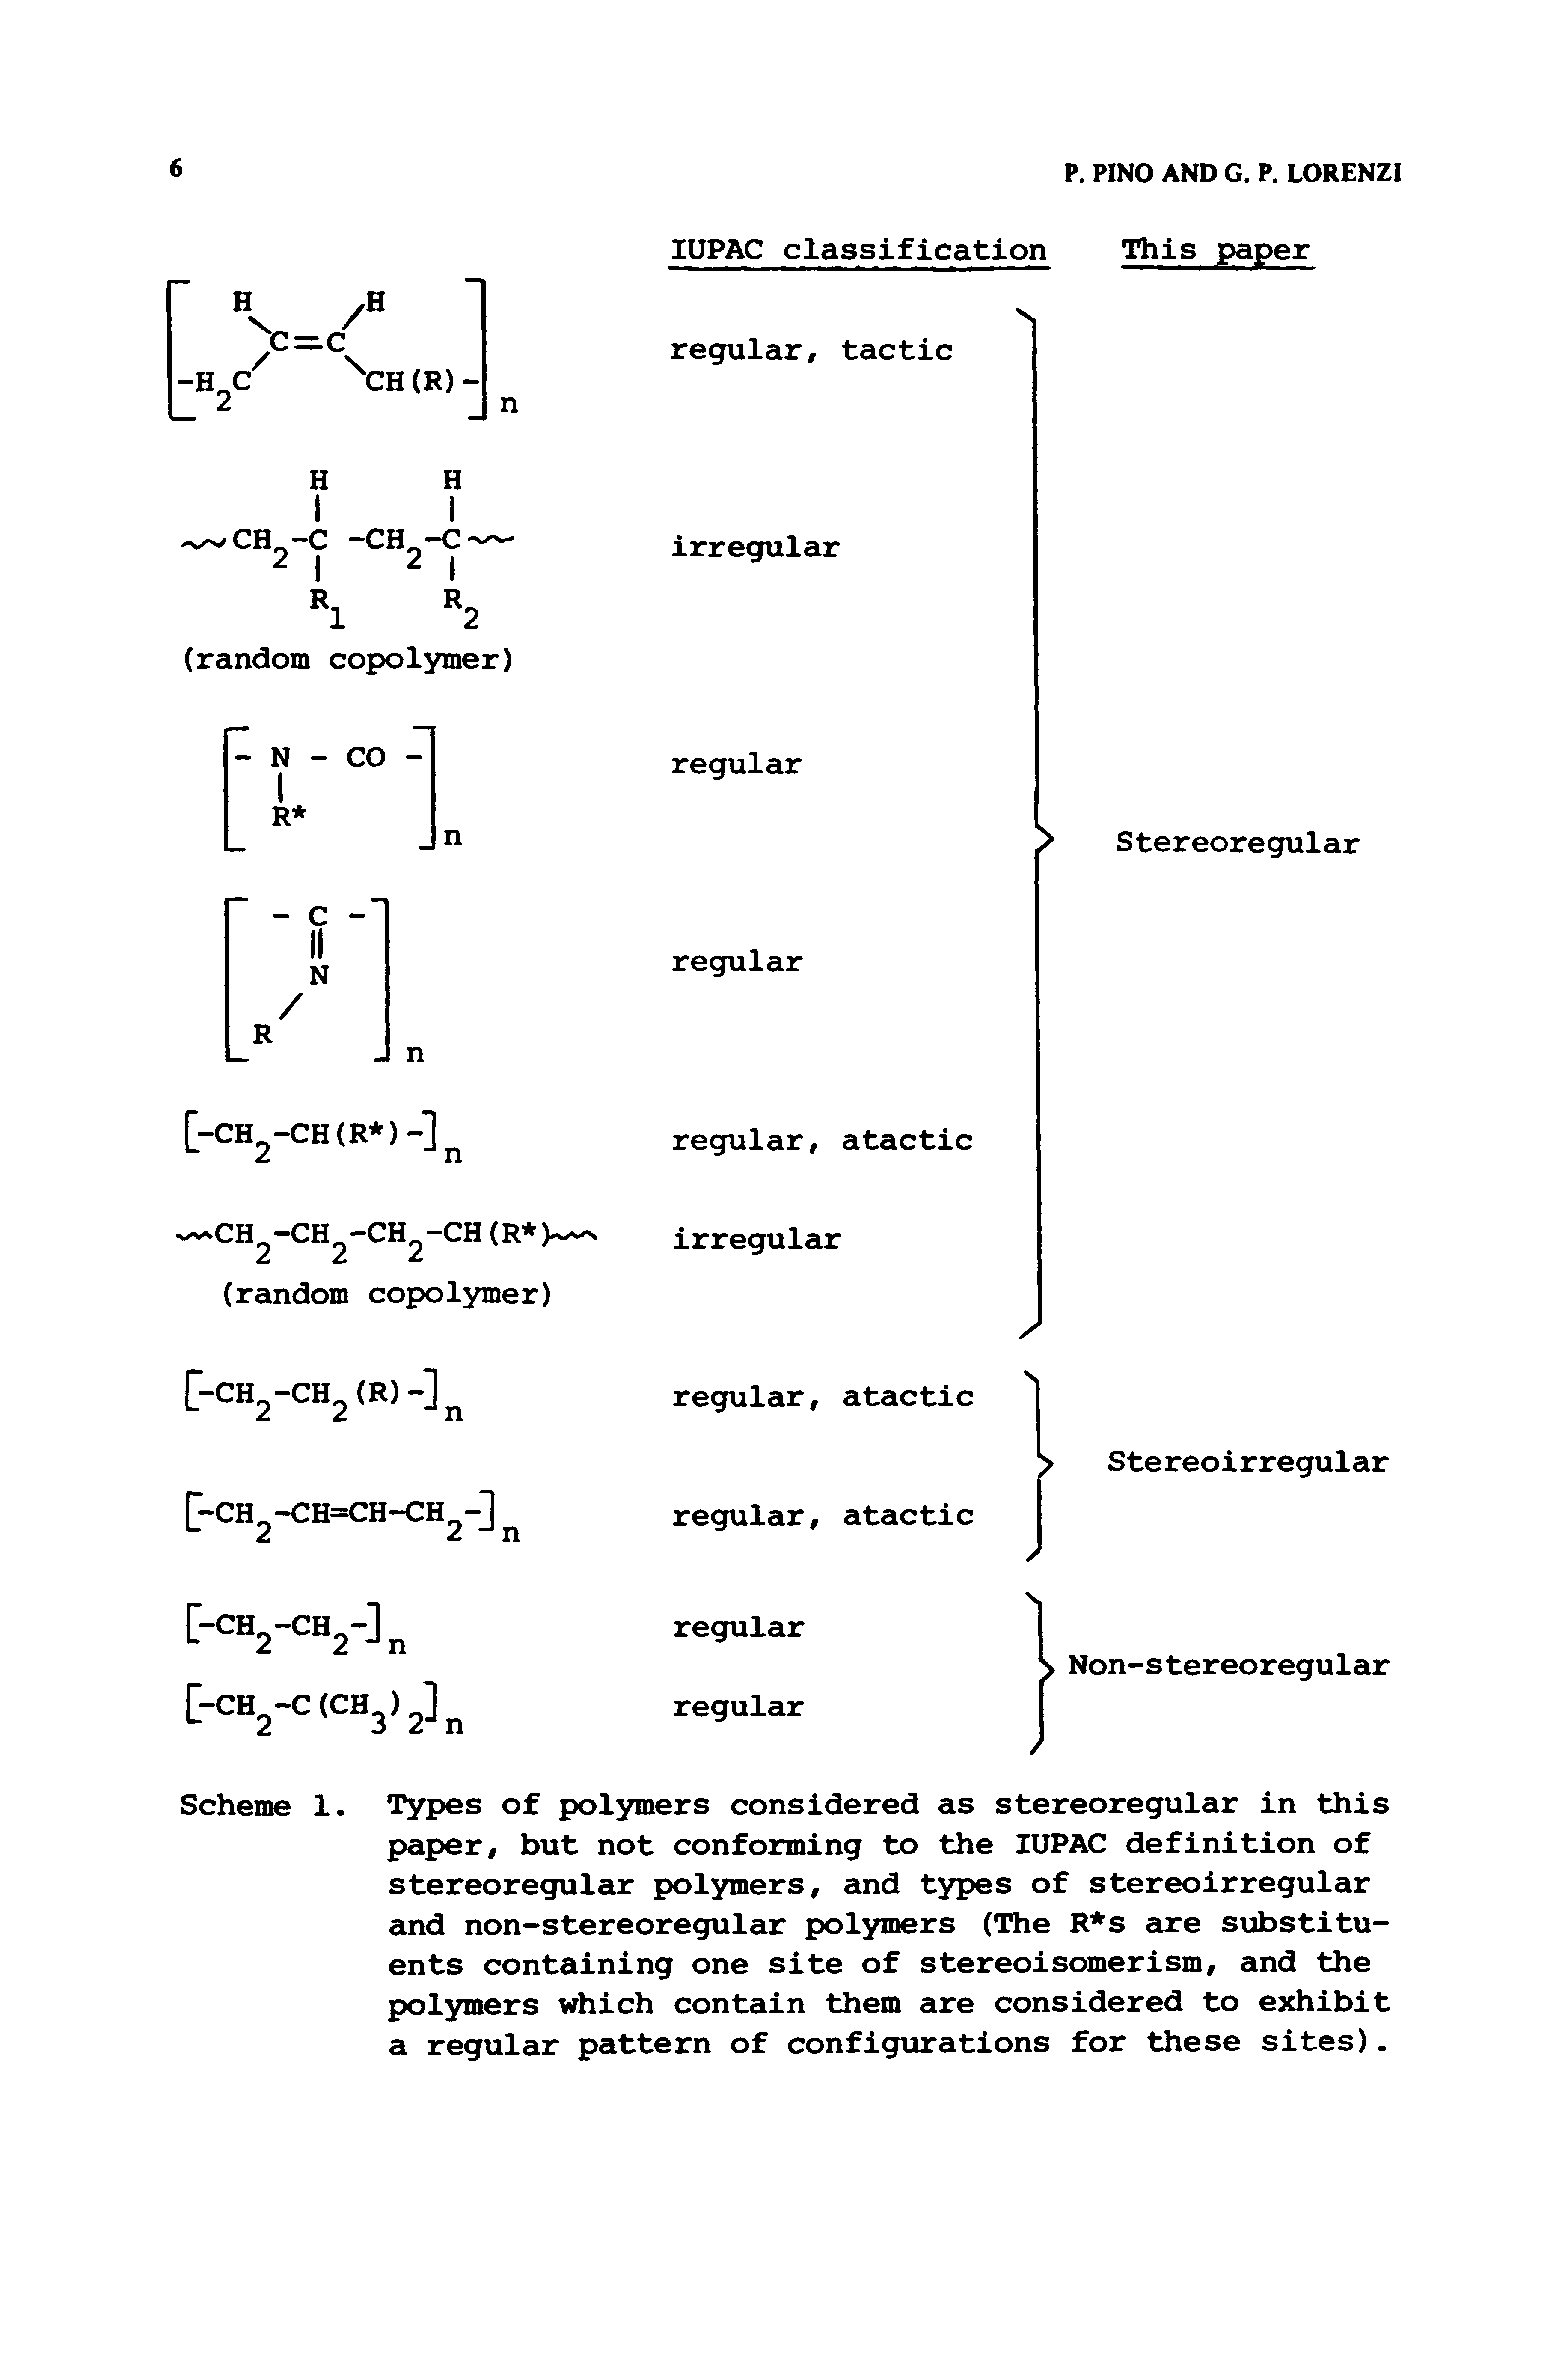 Scheme 1. Types of polymers considered as stereoregular in this paper, but not conforming to the lUPAC definition of stereoregular polymers, and types of stereoirregular and non-stereoregular polymers (The R s are substituents containing one site of stereoisomerism, and the polymers which contain them are considered to exhibit a regular pattern of configurations for these sites).